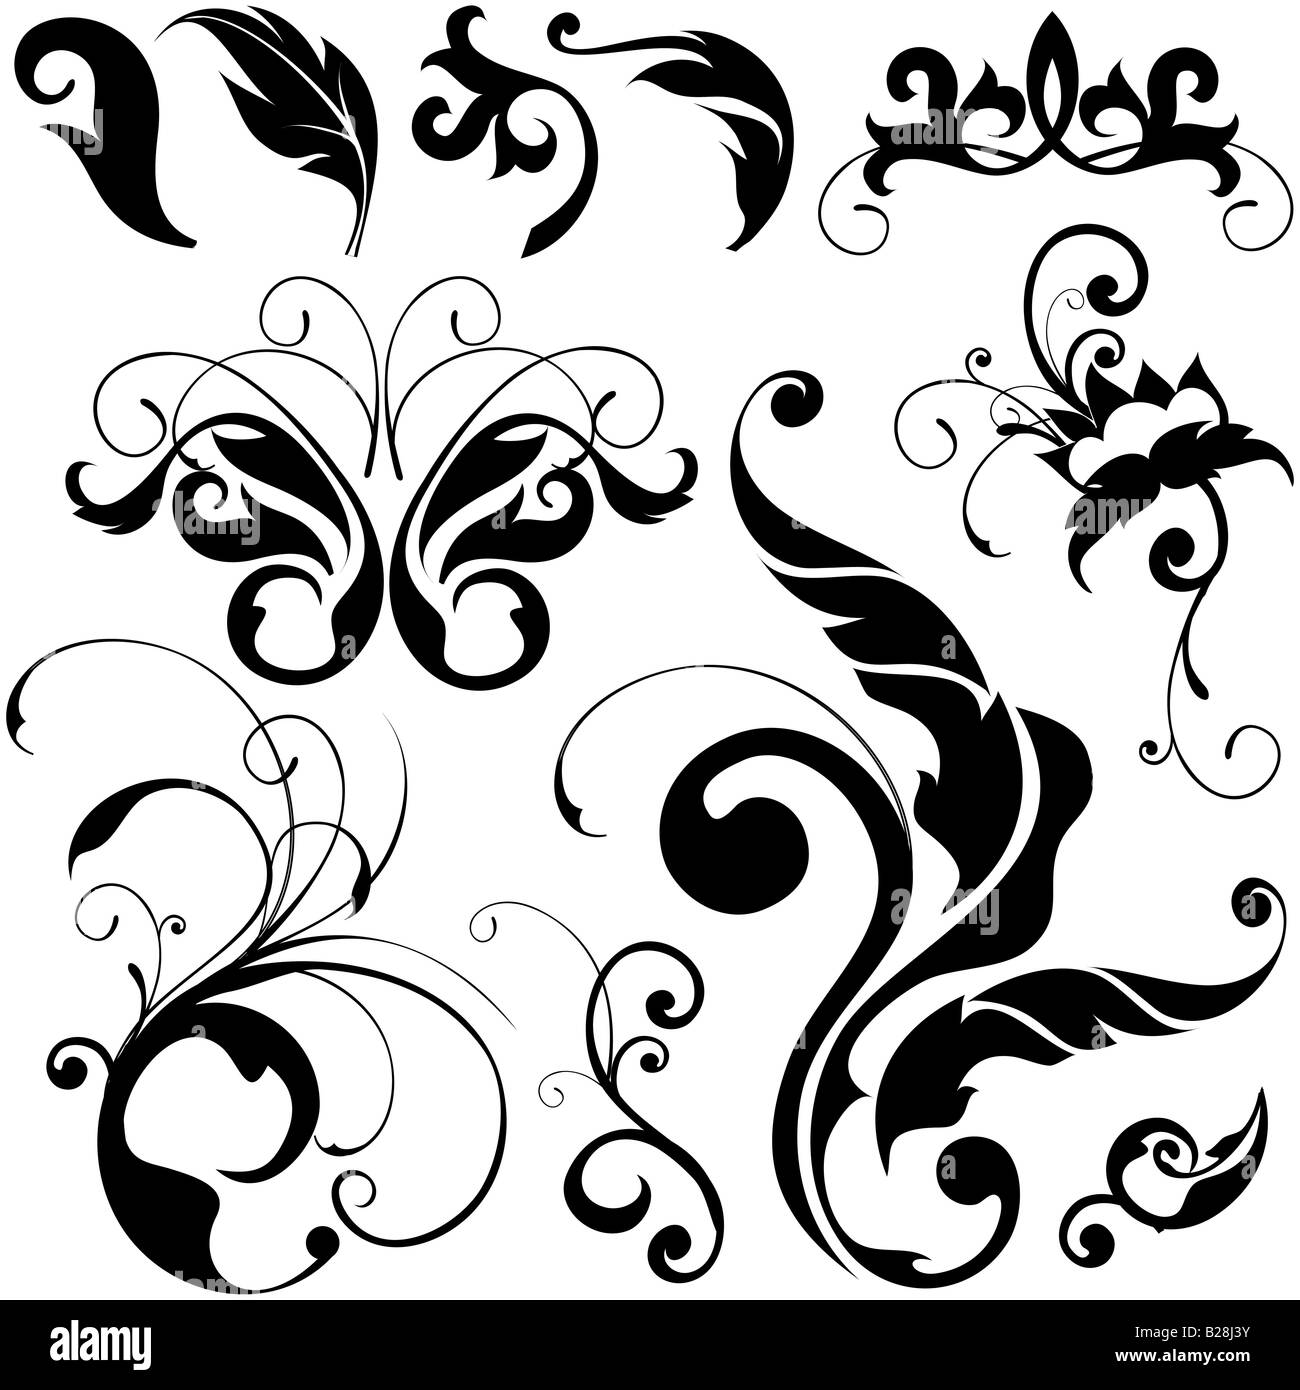 illustration drawing of floral design elements Stock Photo - Alamy